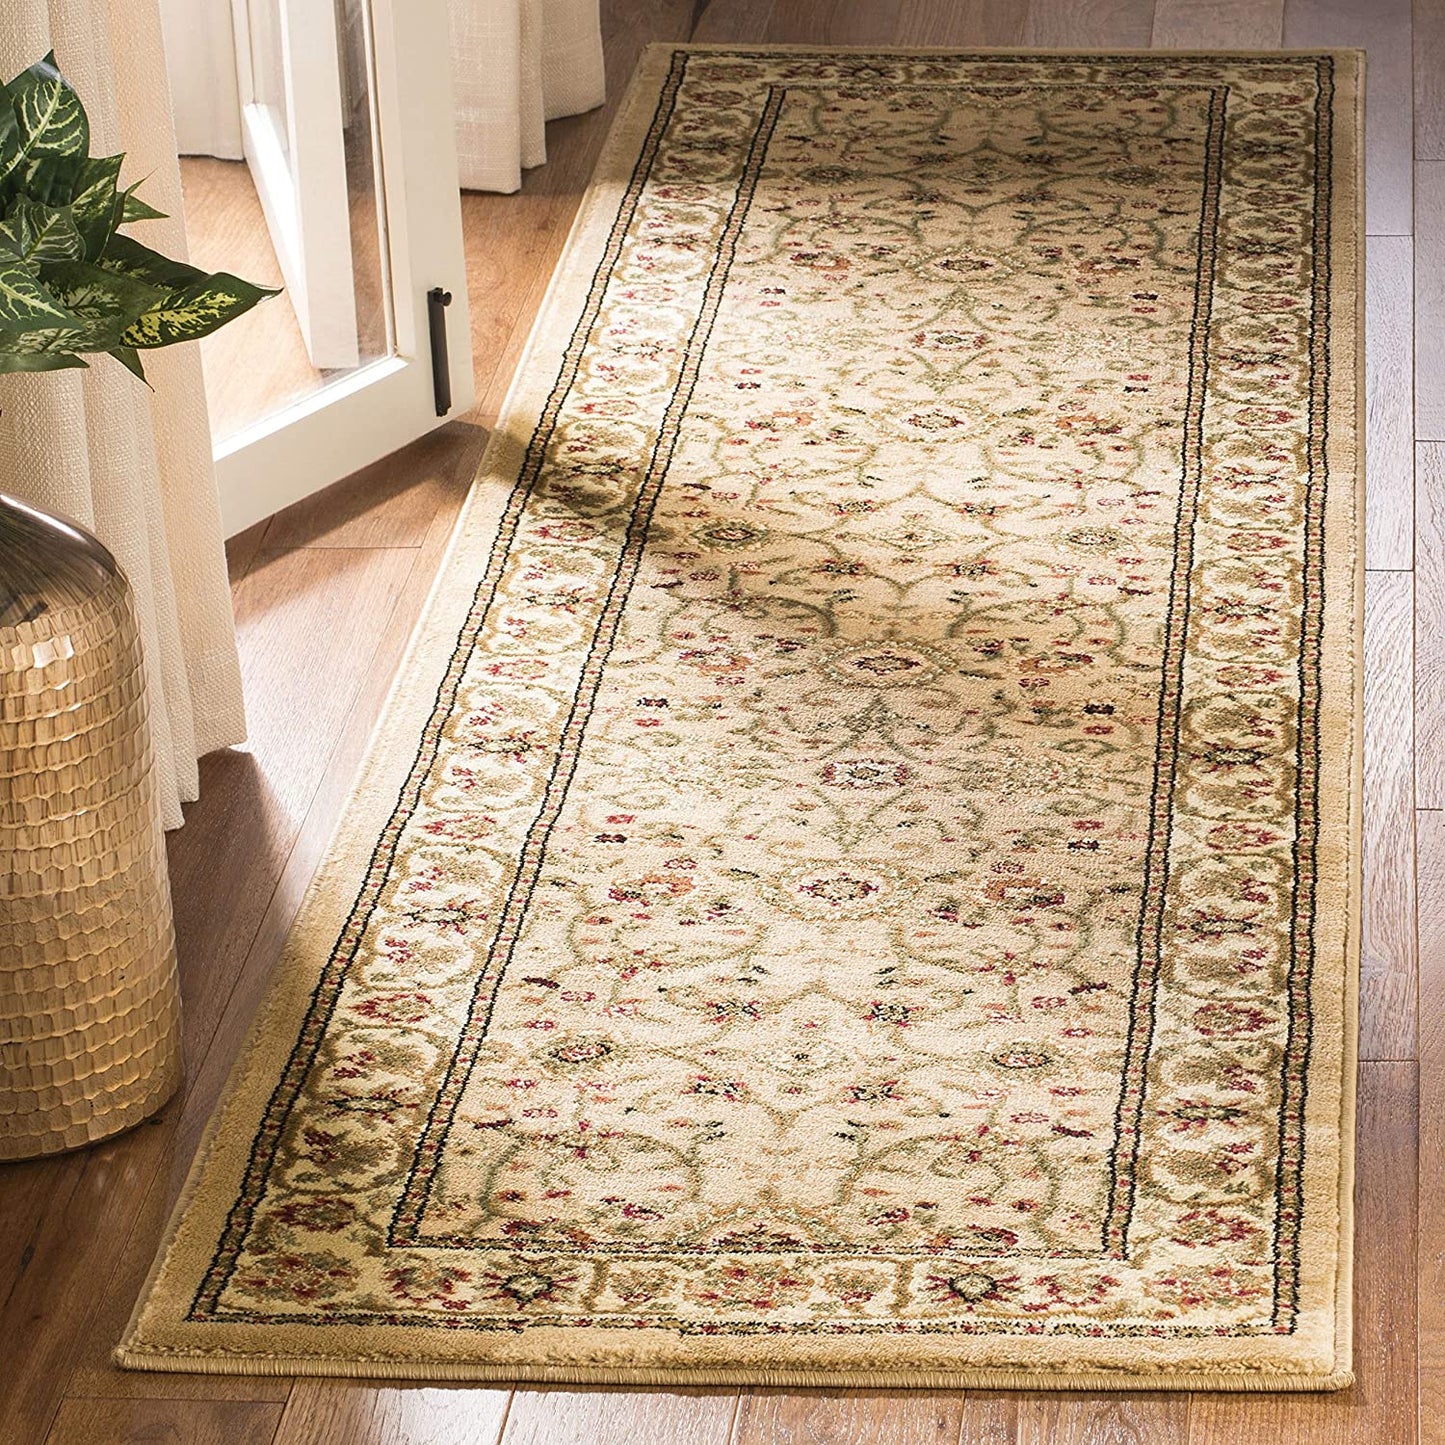 Lyndhurst CollectionTraditional Oriental Non-Shedding Stain Resistant Living Room Bedroom Accent Rug Beige / Ivory